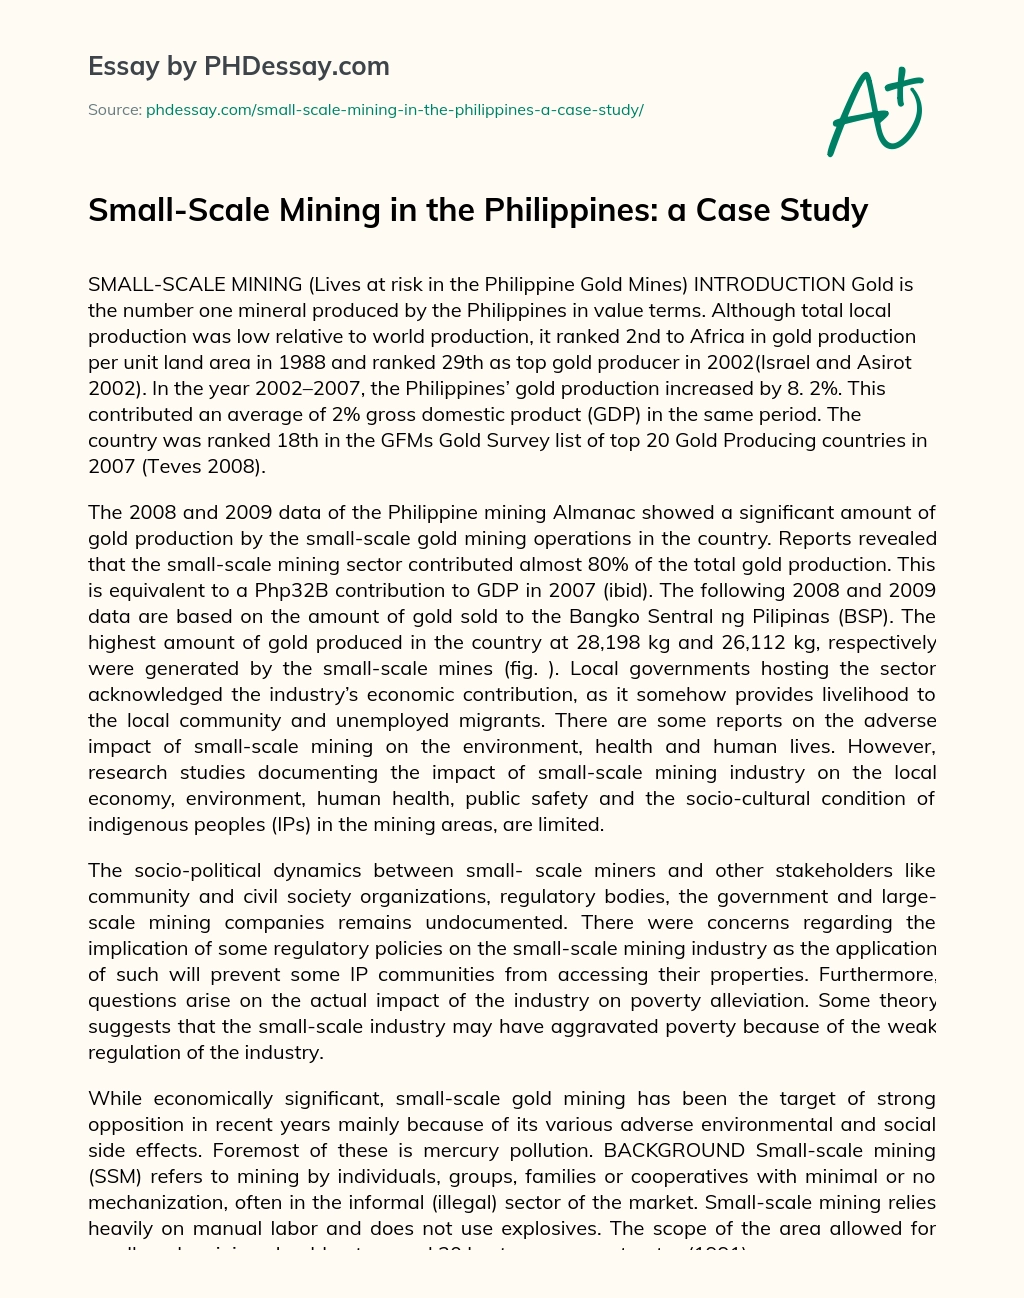 Small-Scale Mining in the Philippines: a Case Study essay